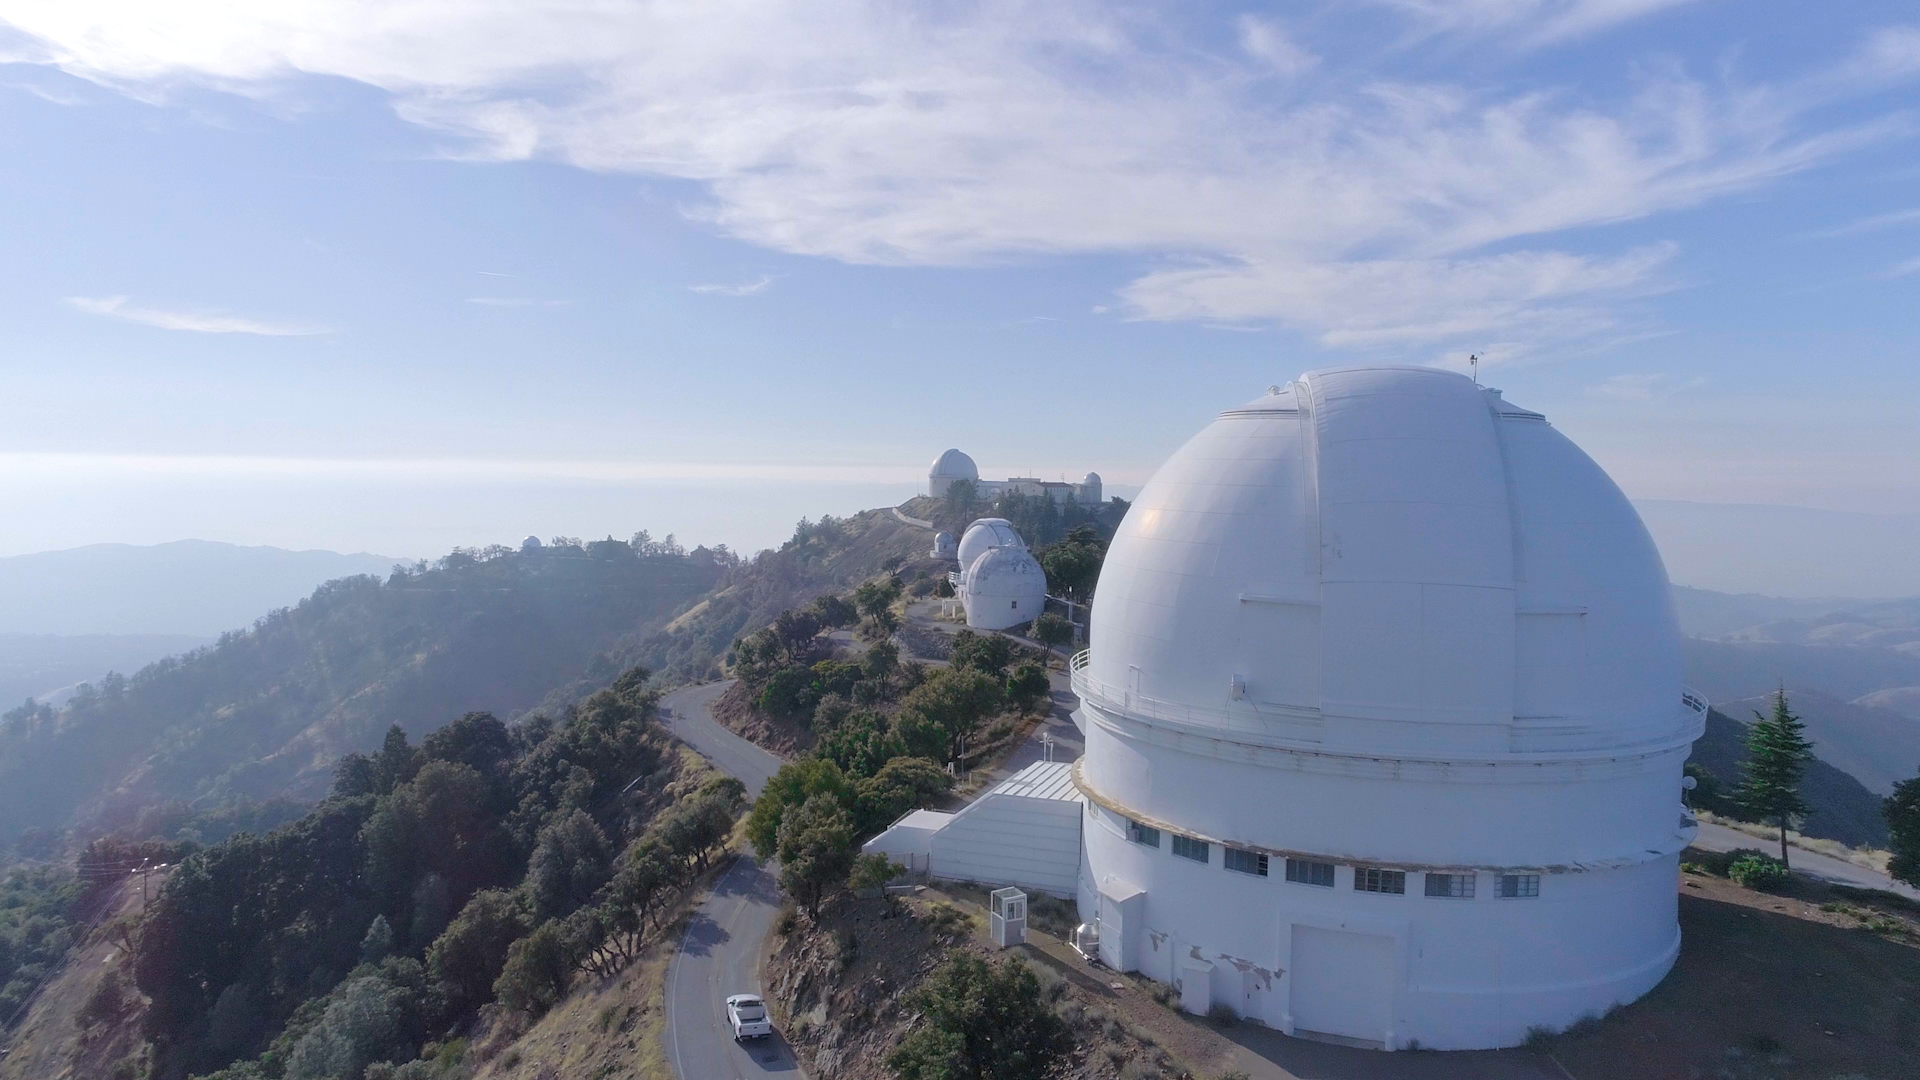 Drone Image of Lick Observatory